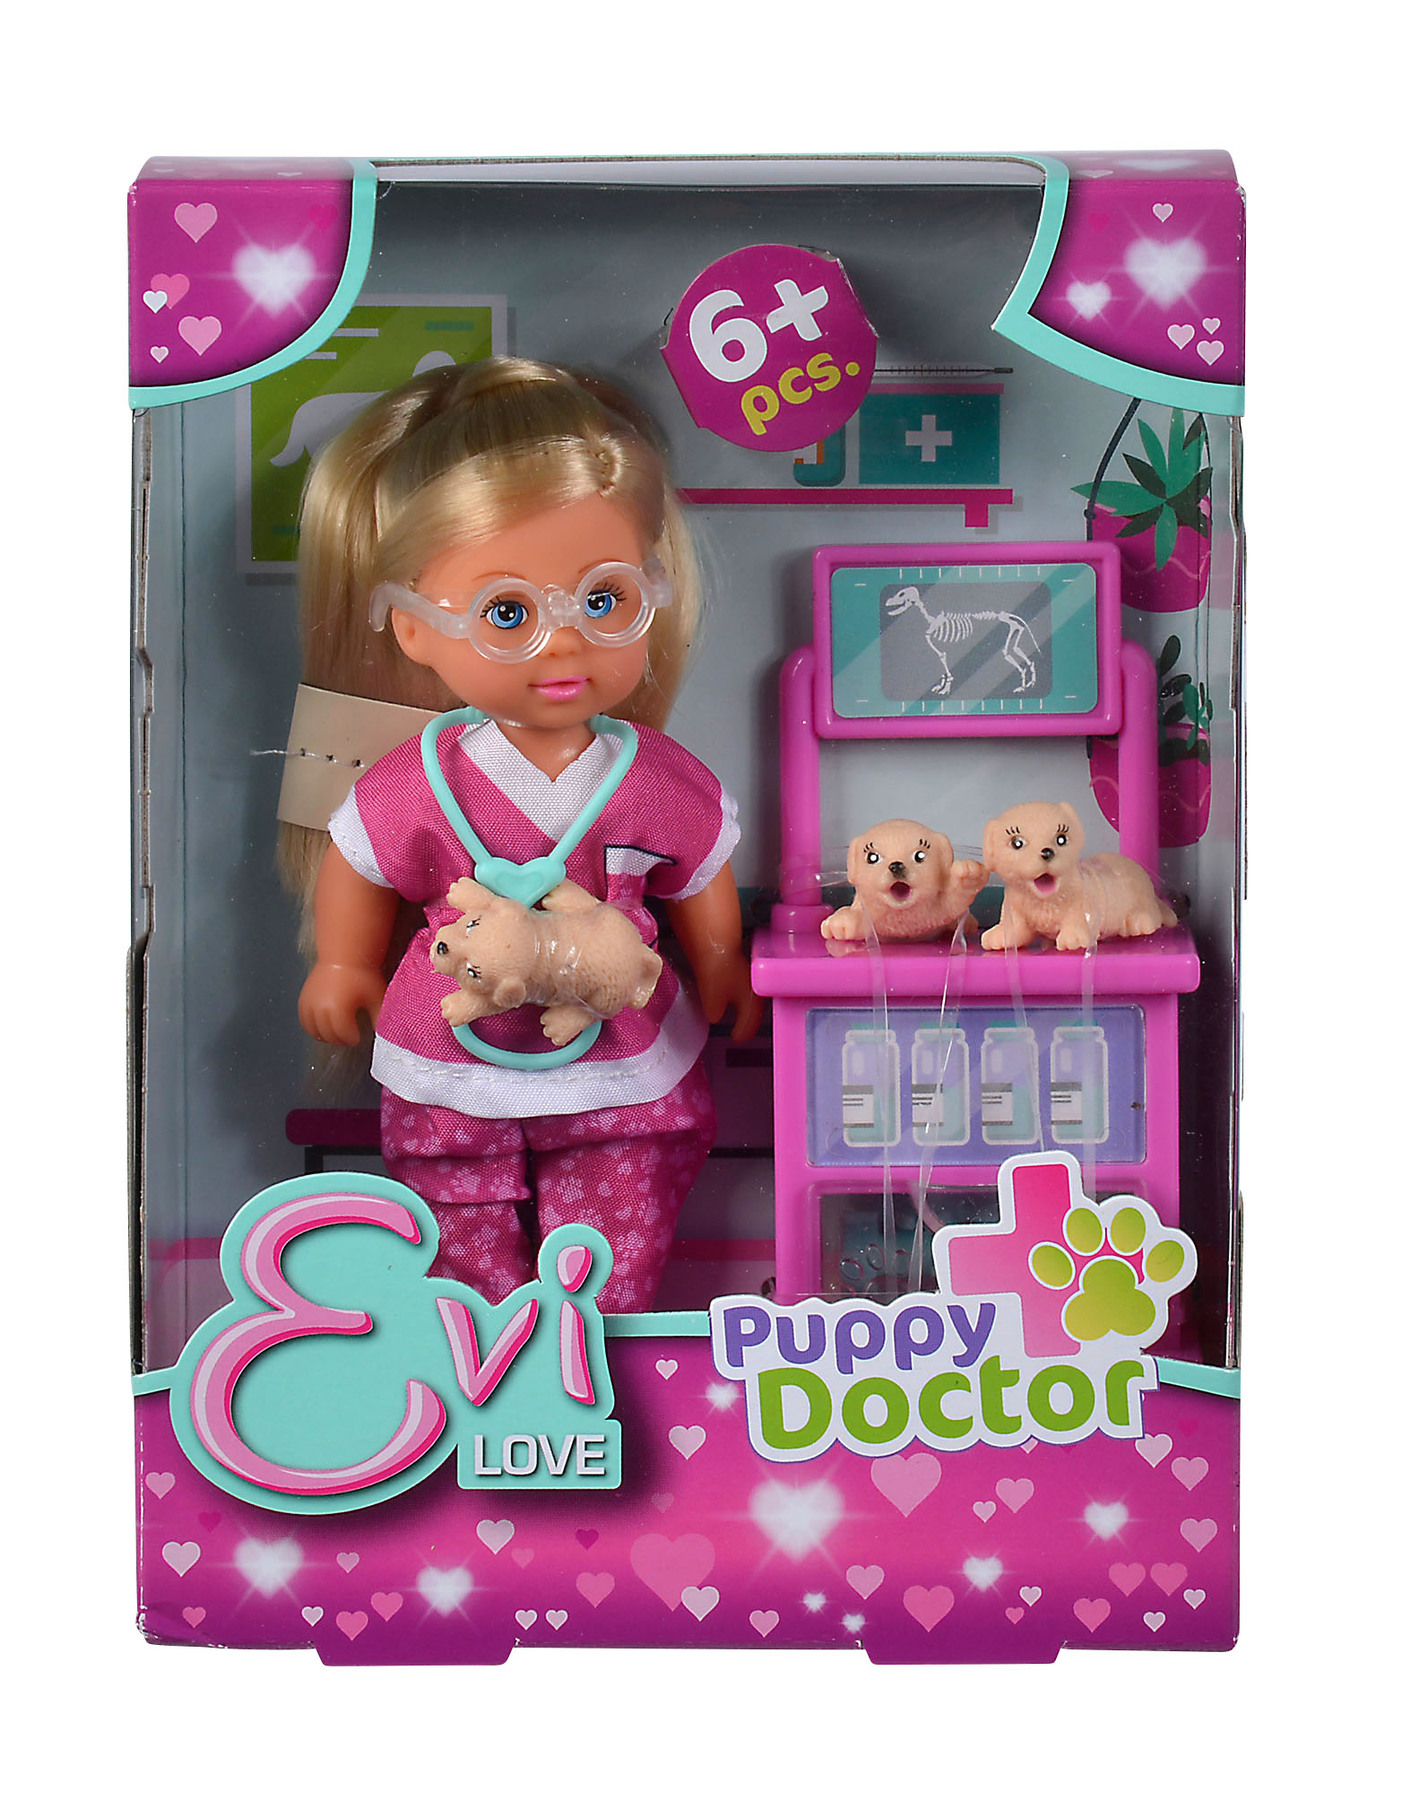 Evi Love Puppy Doctor